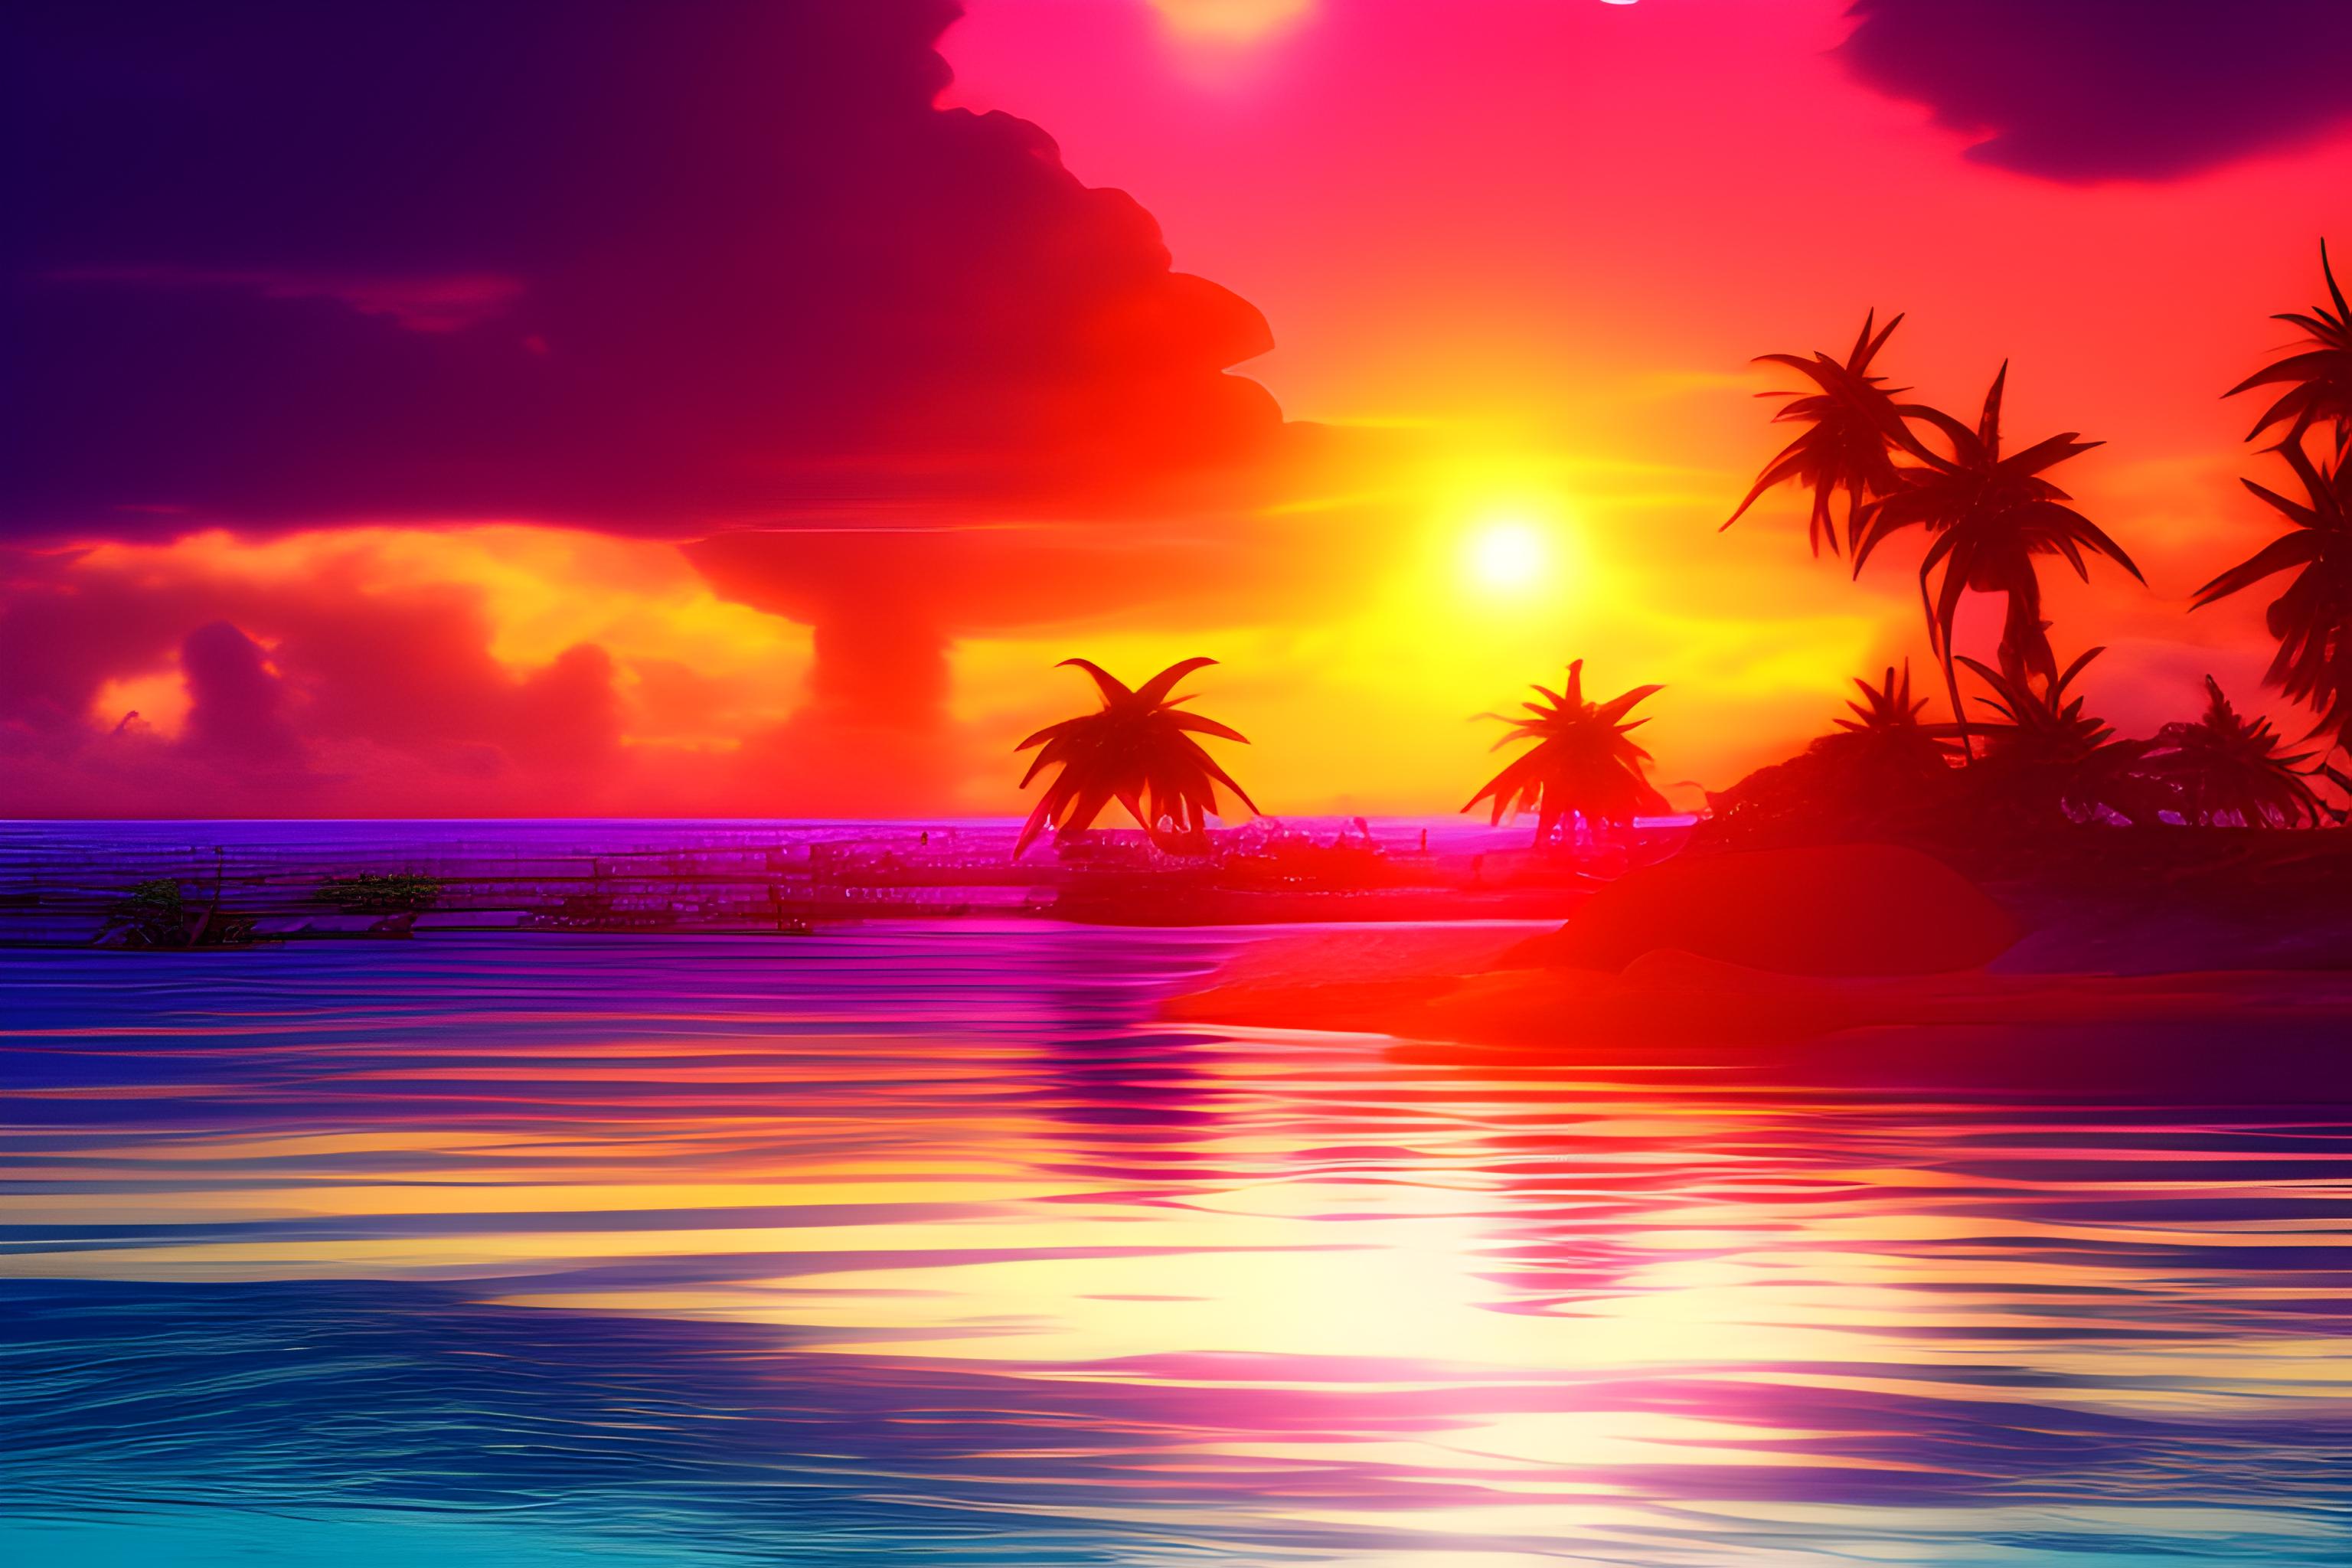 chill tropical sunset vibes at sunset | Wallpapers.ai